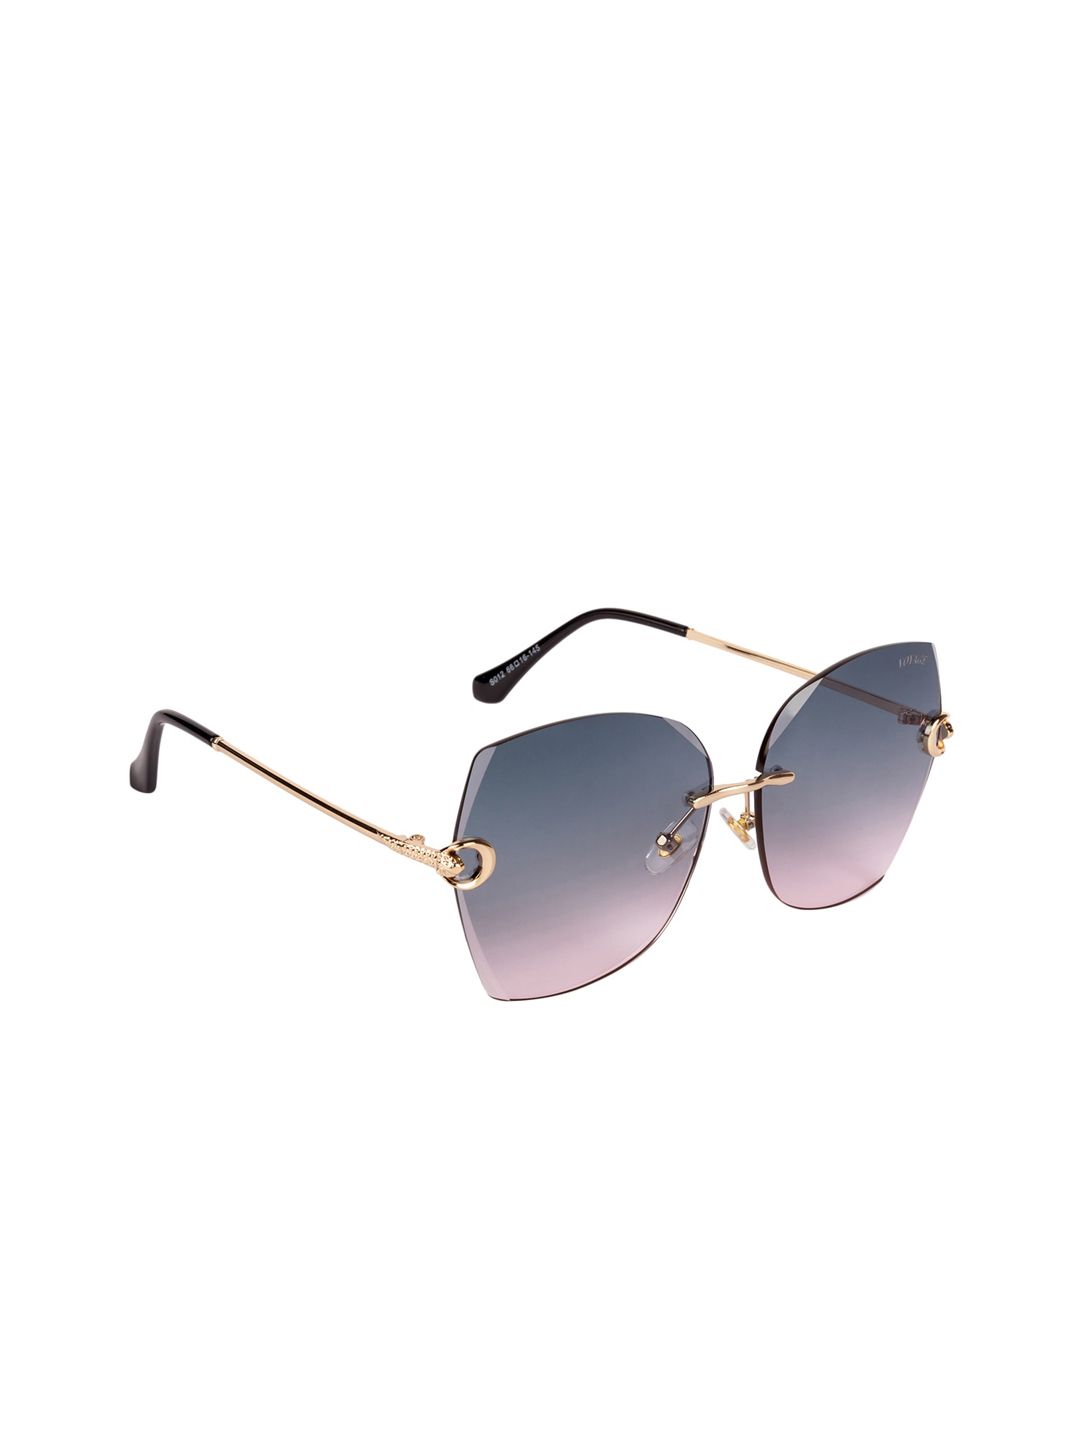 Voyage Women Teal & Gold-Toned Cateye Sunglasses With UV Protected Lens S012MG2877B Price in India